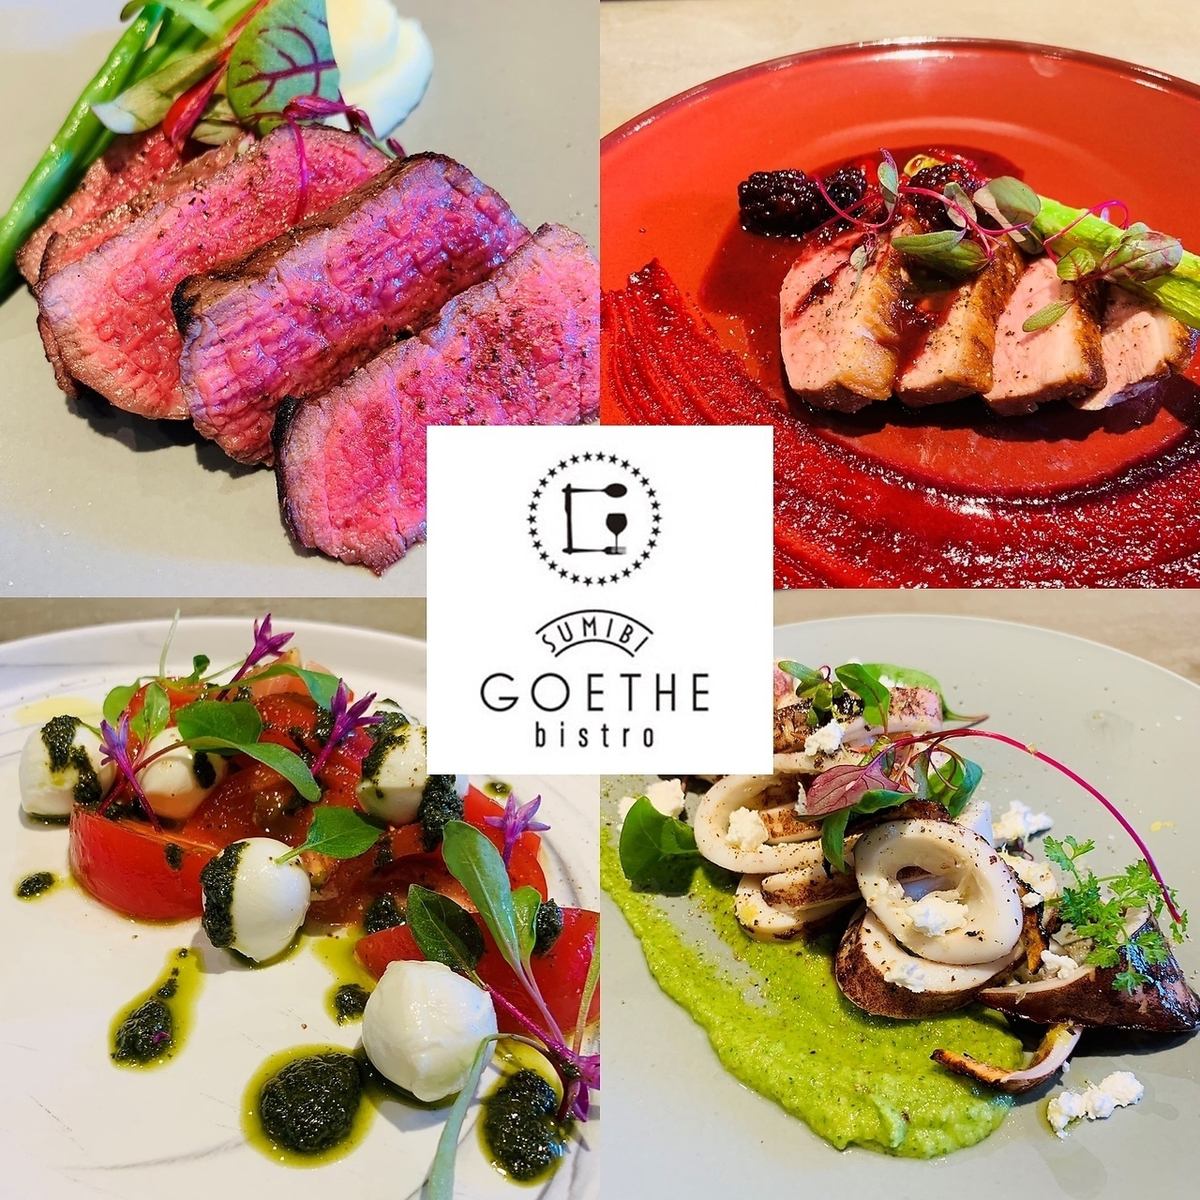 Charcoal bistro GOETHE Enjoy a delicious meal in a space where time flows slowly